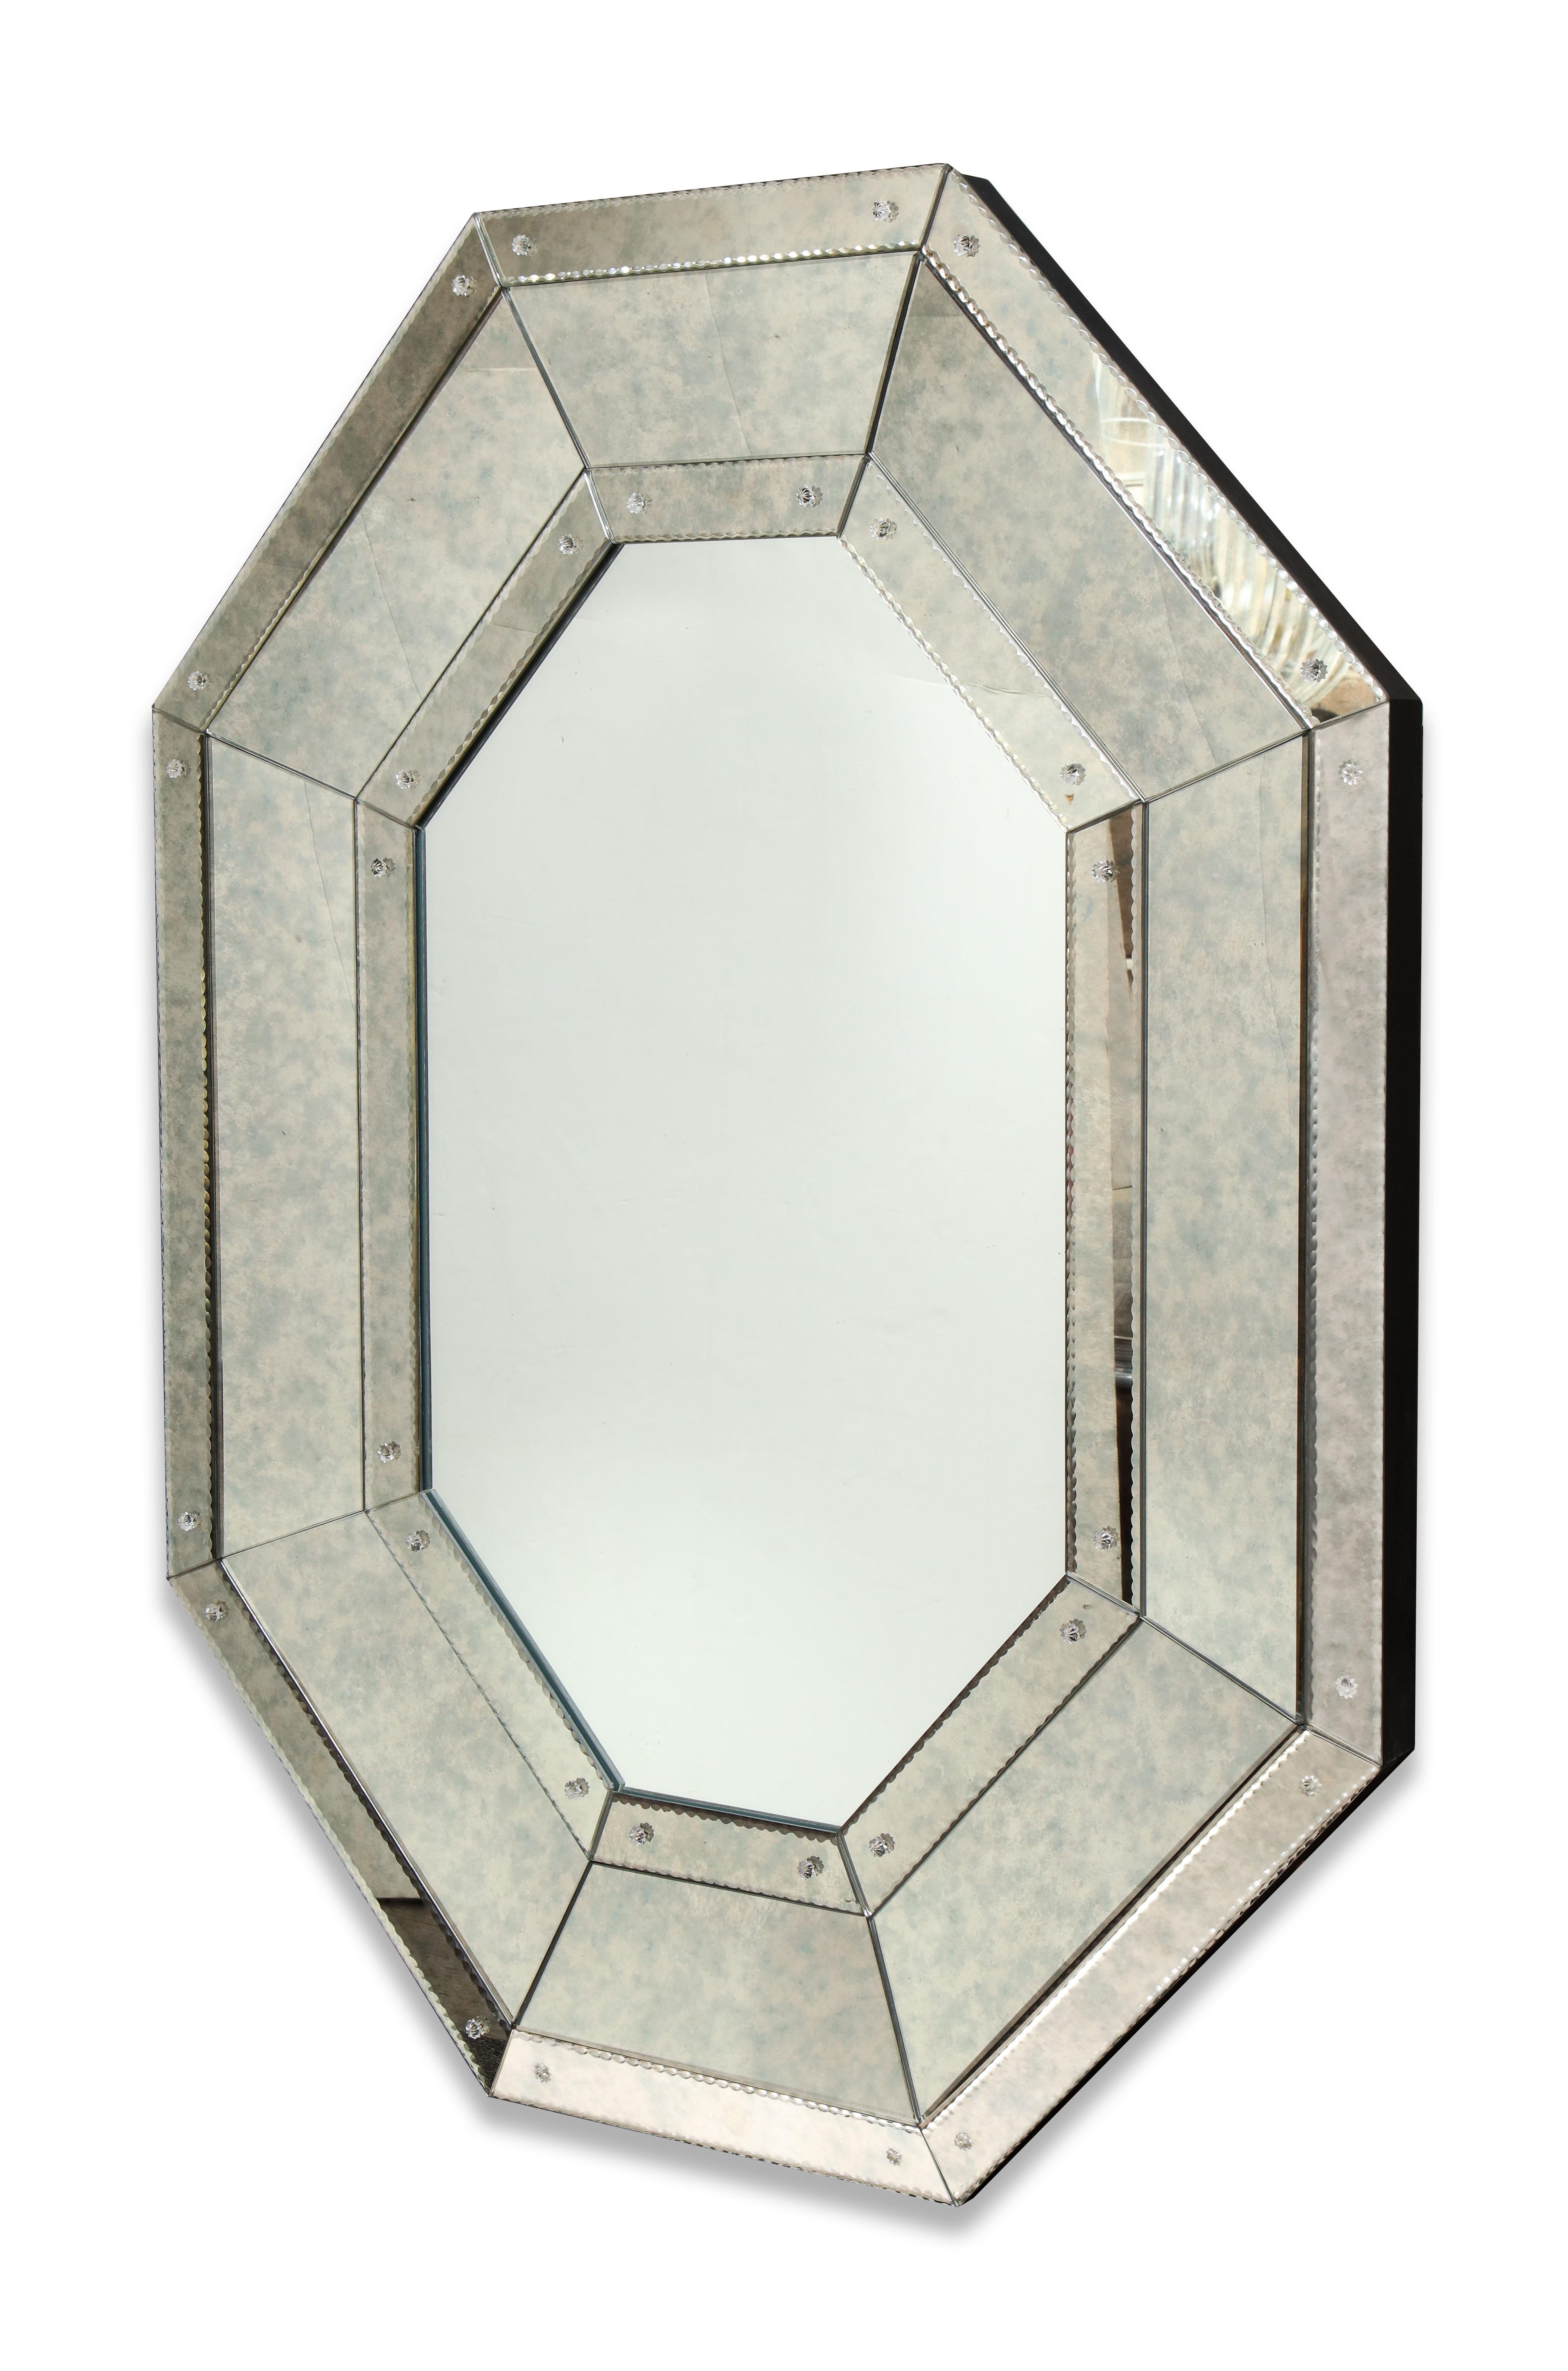 Beautiful custom octagon mirror with pie crust edges and glass rosettes. The mirror shown here has clear finish in the center and Hade antique finish on the perimeter. Custom orders are available for different sizes, shapes and mirror finishes.